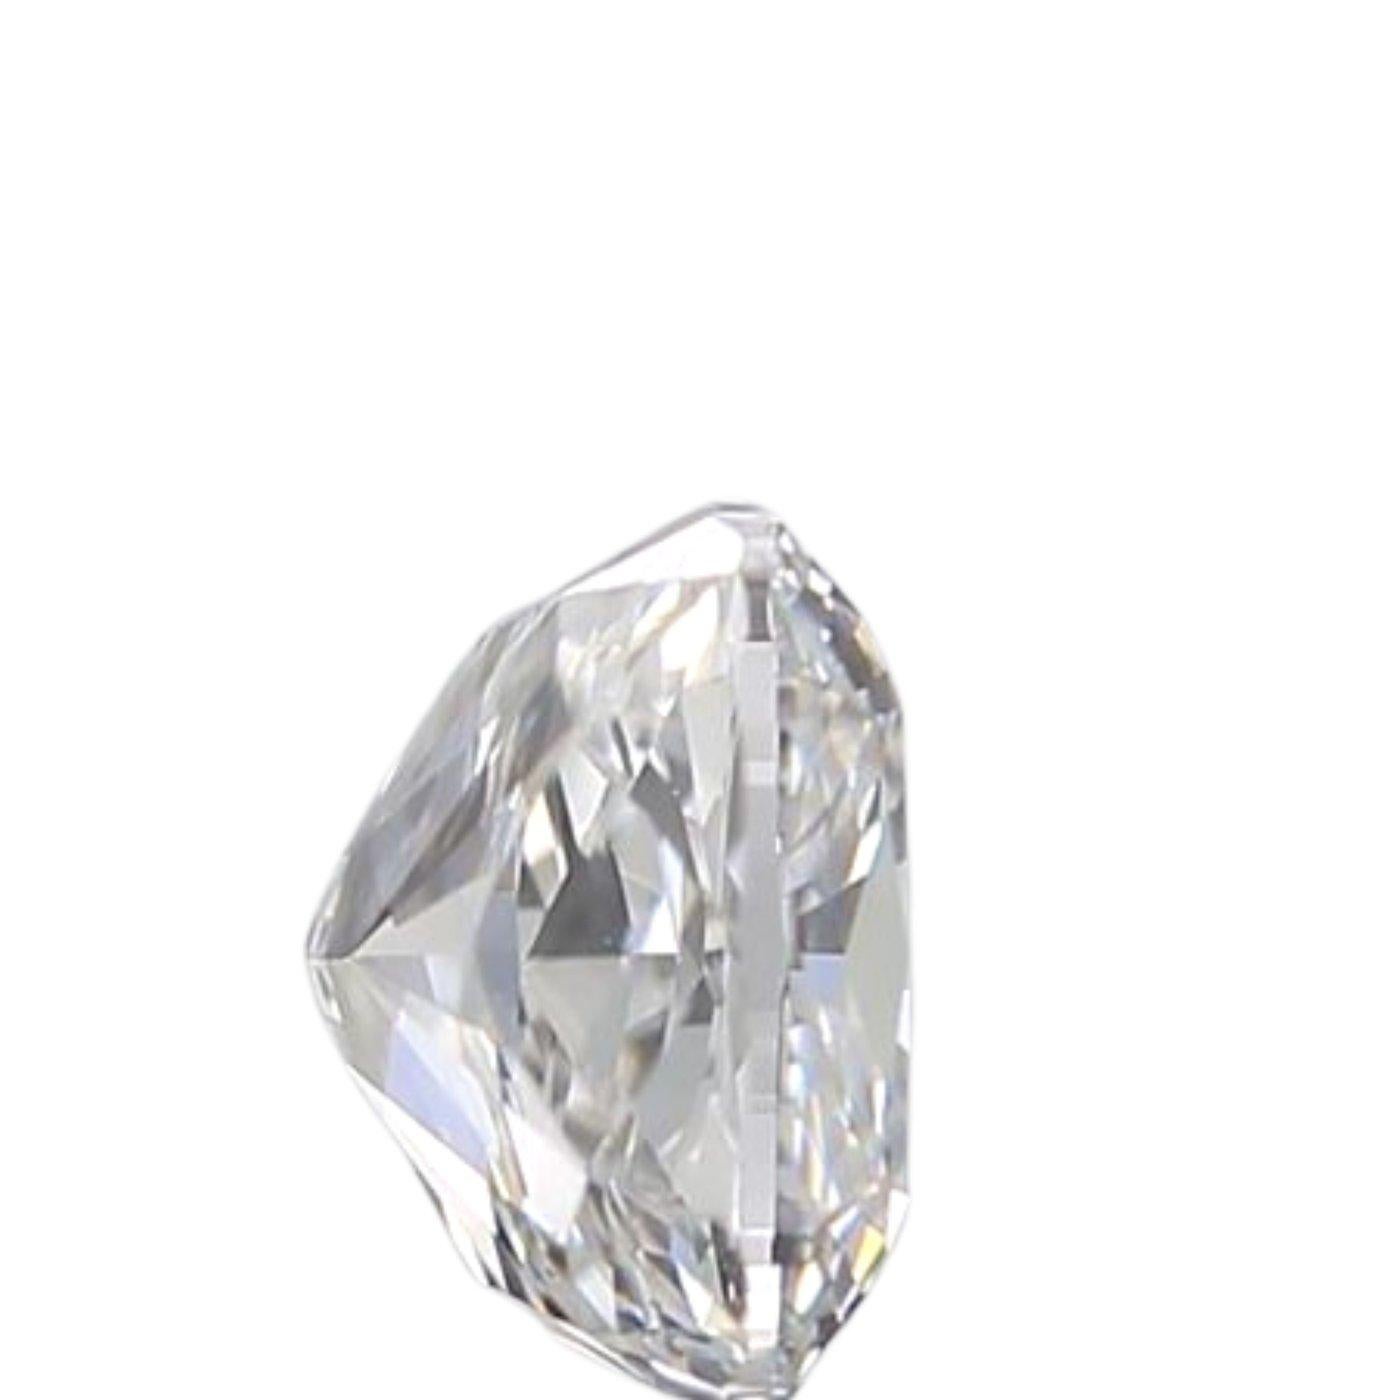 Natural and Ideal Cut Cushion Diamond in a 0.42 carat E VS1, GIA Certificate In New Condition For Sale In רמת גן, IL